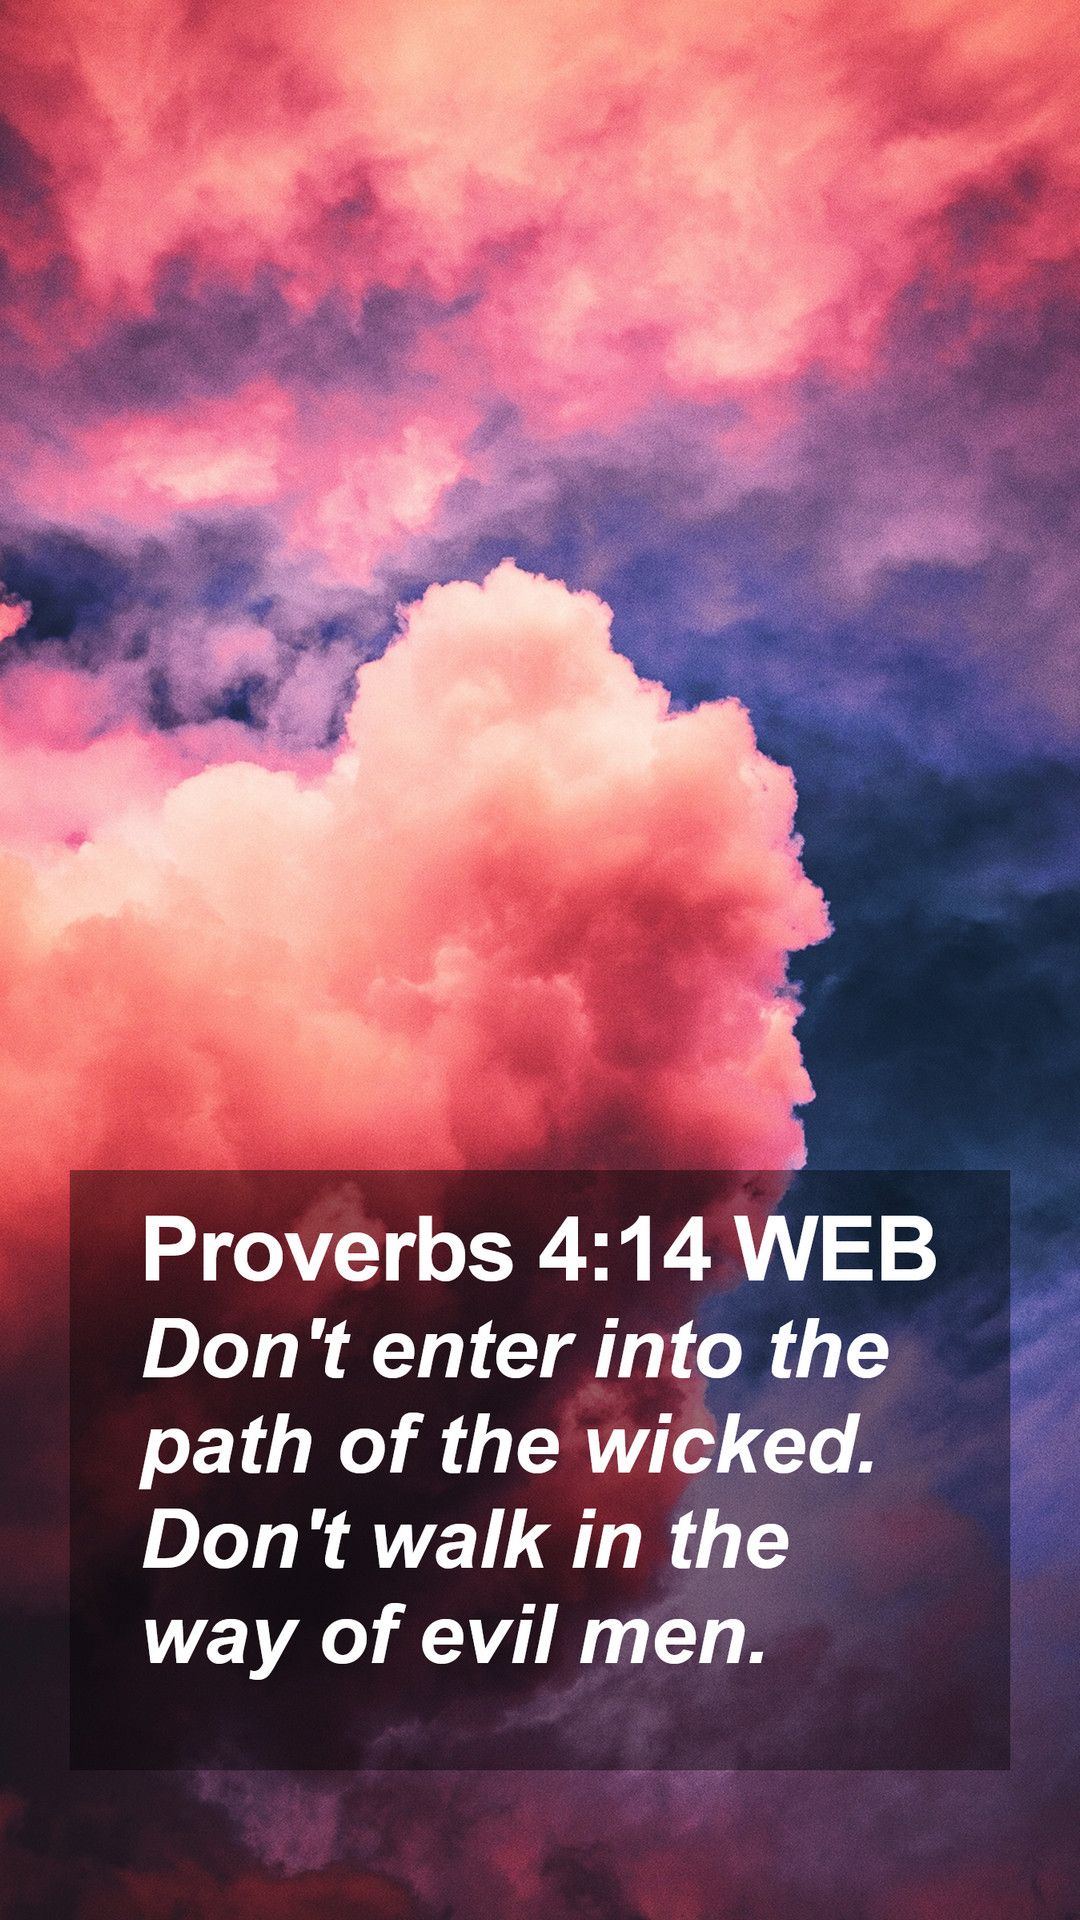 Proverbs 4:14 WEB Mobile Phone Wallpaper't enter into the path of the wicked. Don't